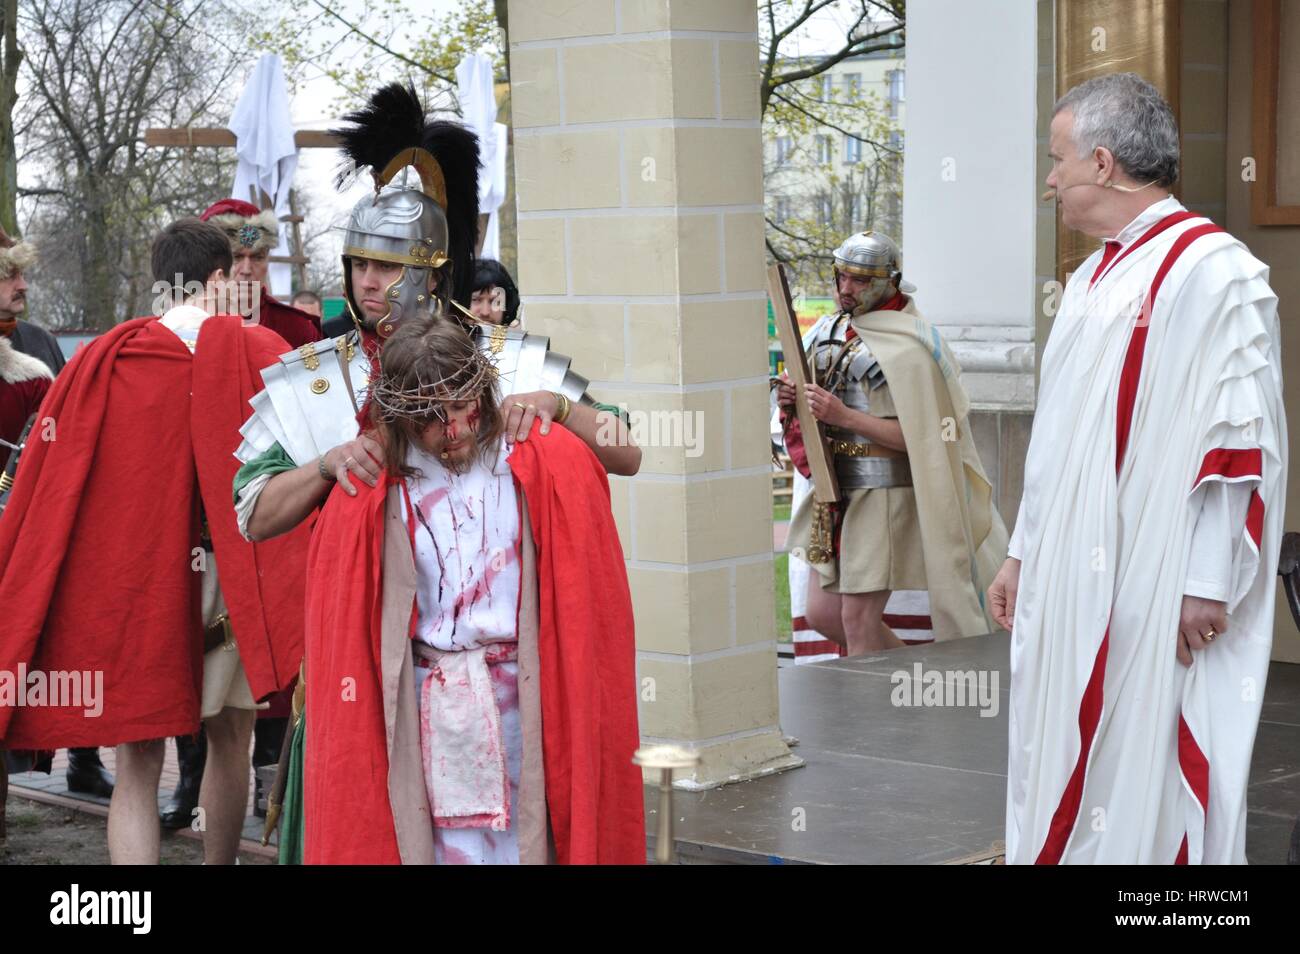 Actors reenact scene of condemning Jesus to death, during the street performances Mystery of the Passion. Stock Photo